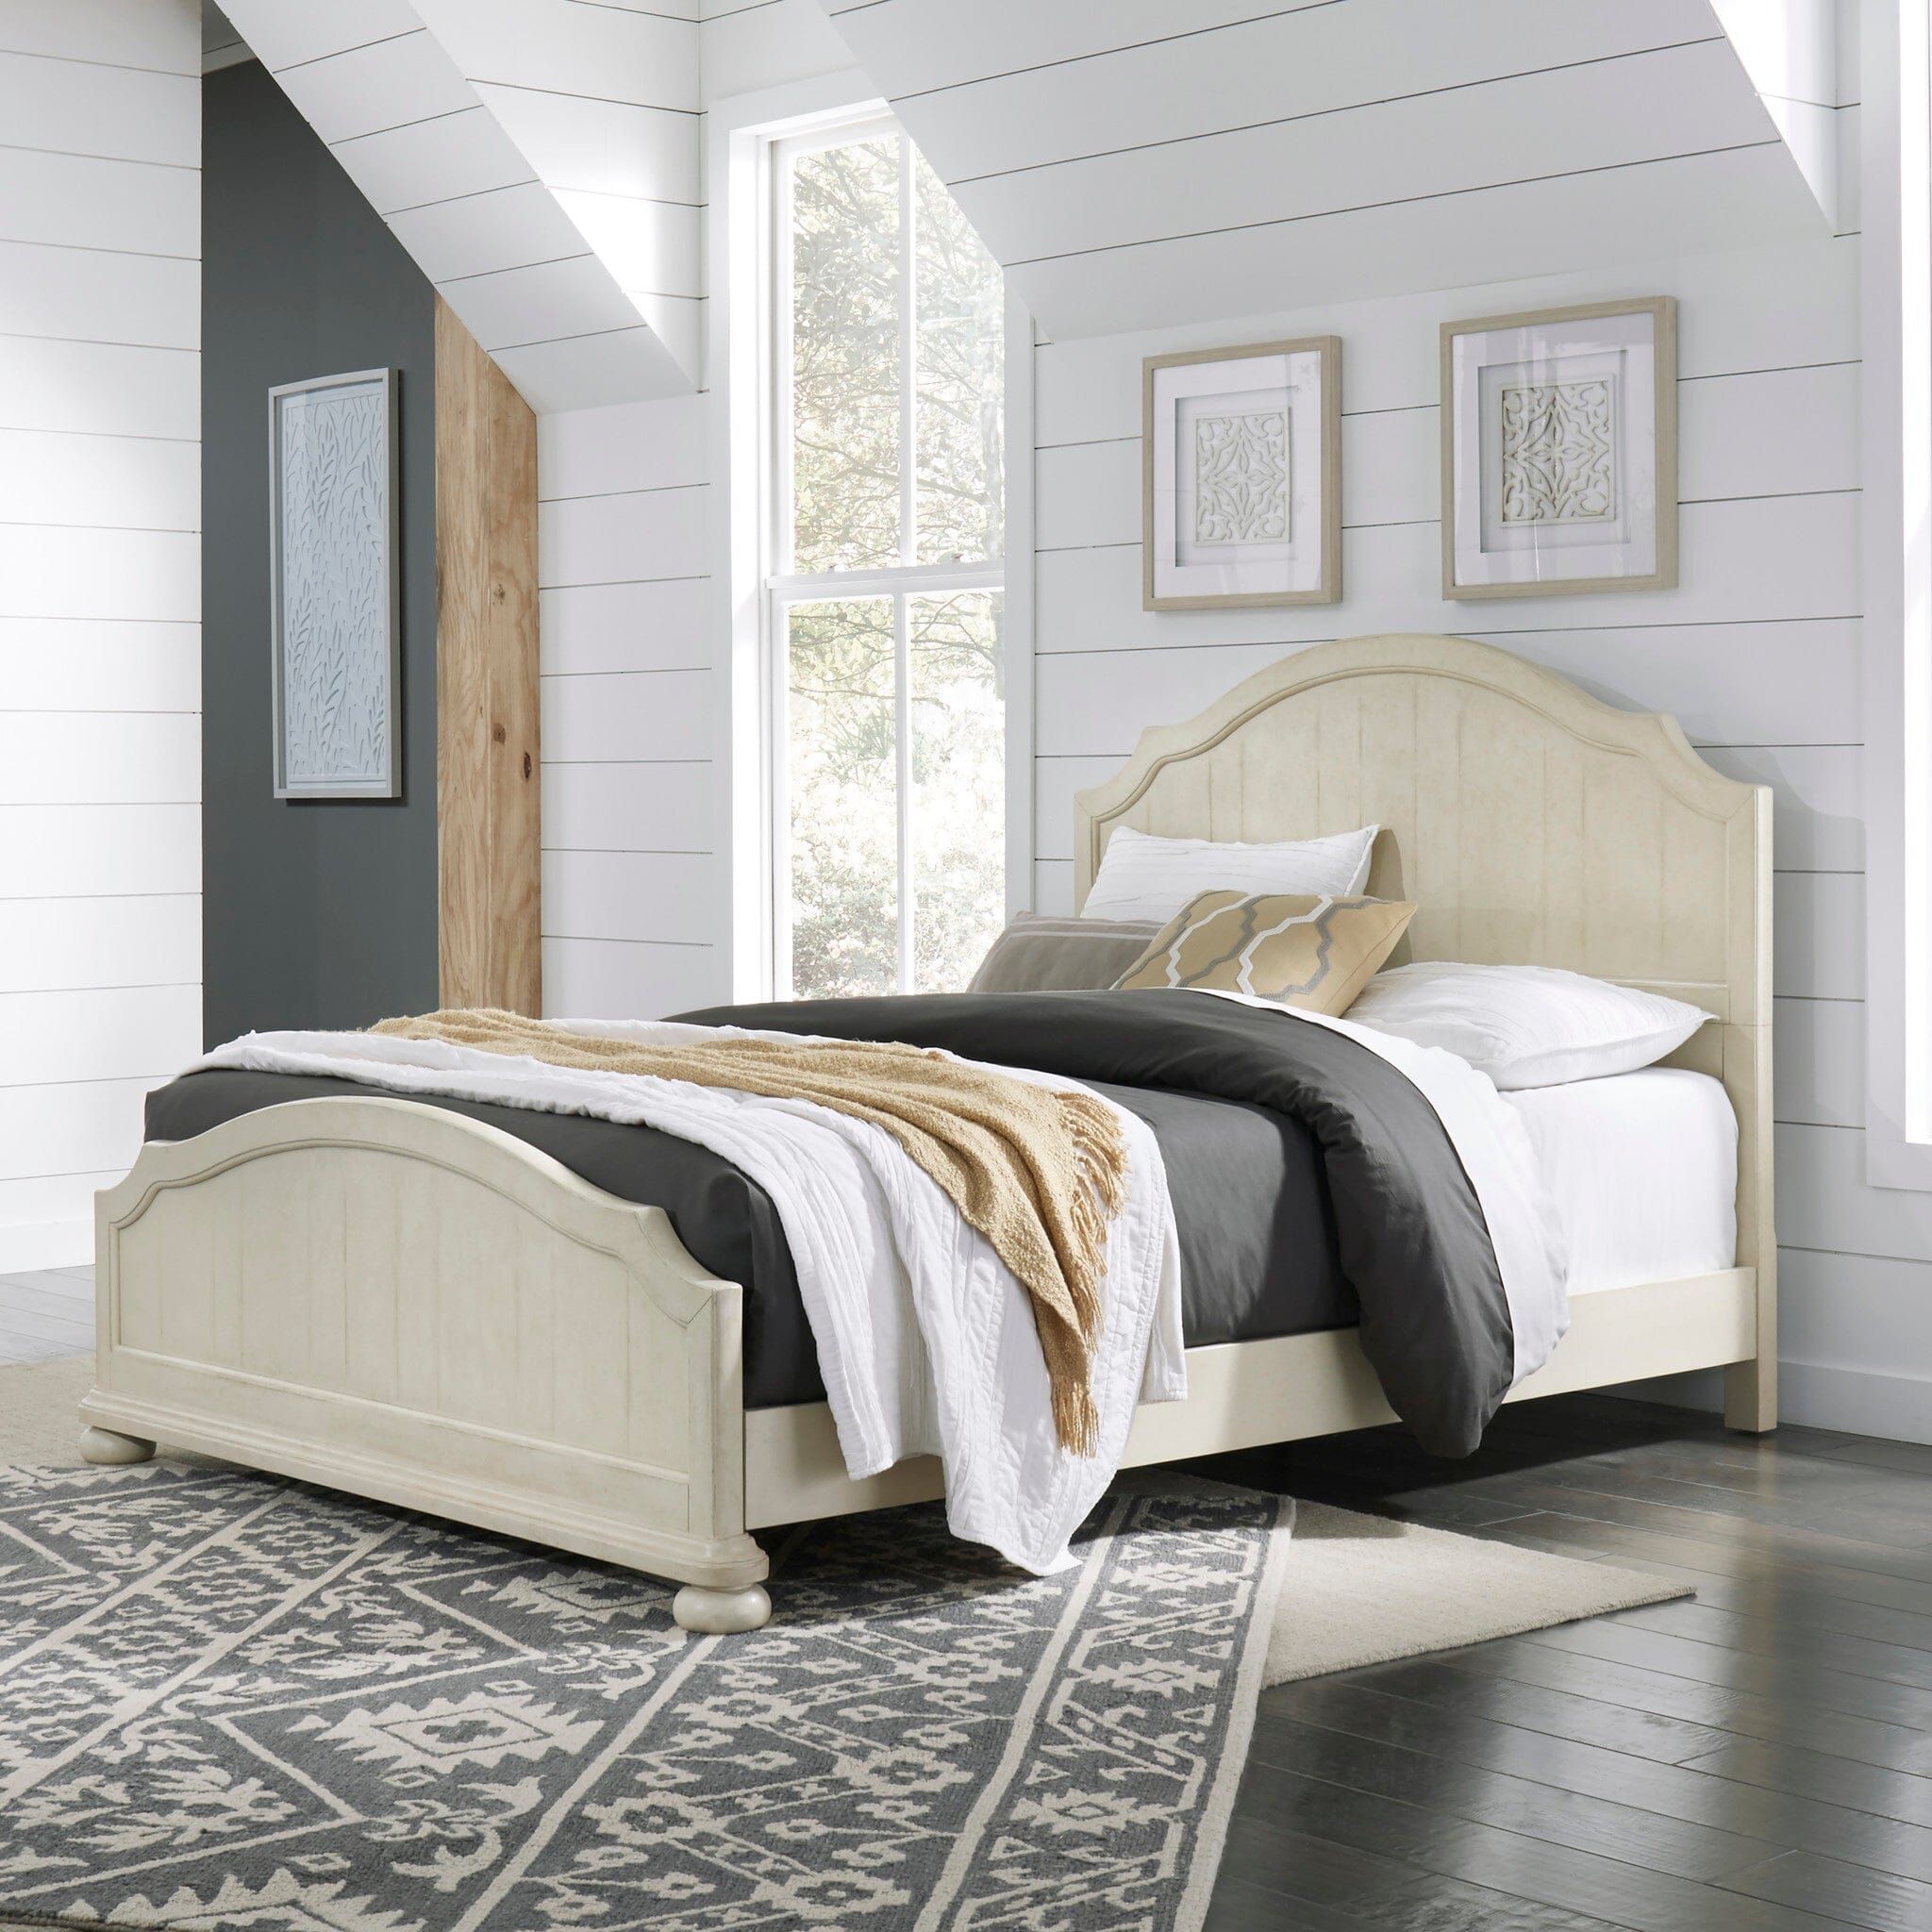 Rustic Farmhouse Queen Bed By Provence Queen Bed Provence